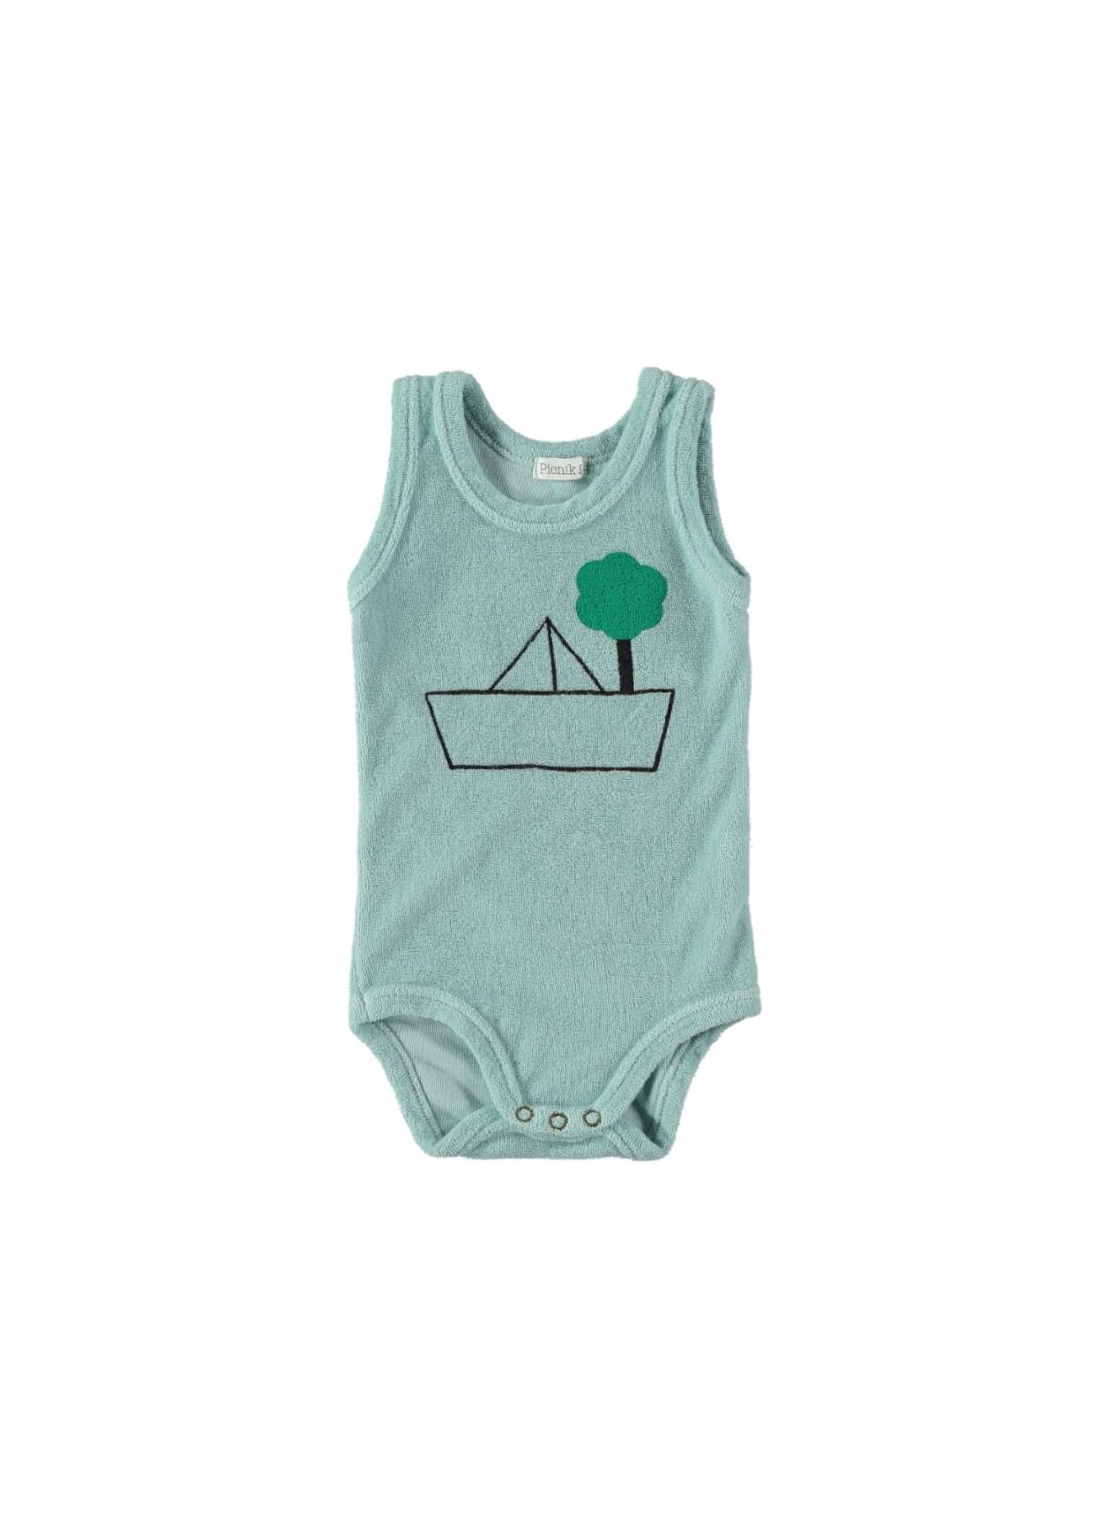 Baby ROMPER Unisex- 100%  Cotton- knitted